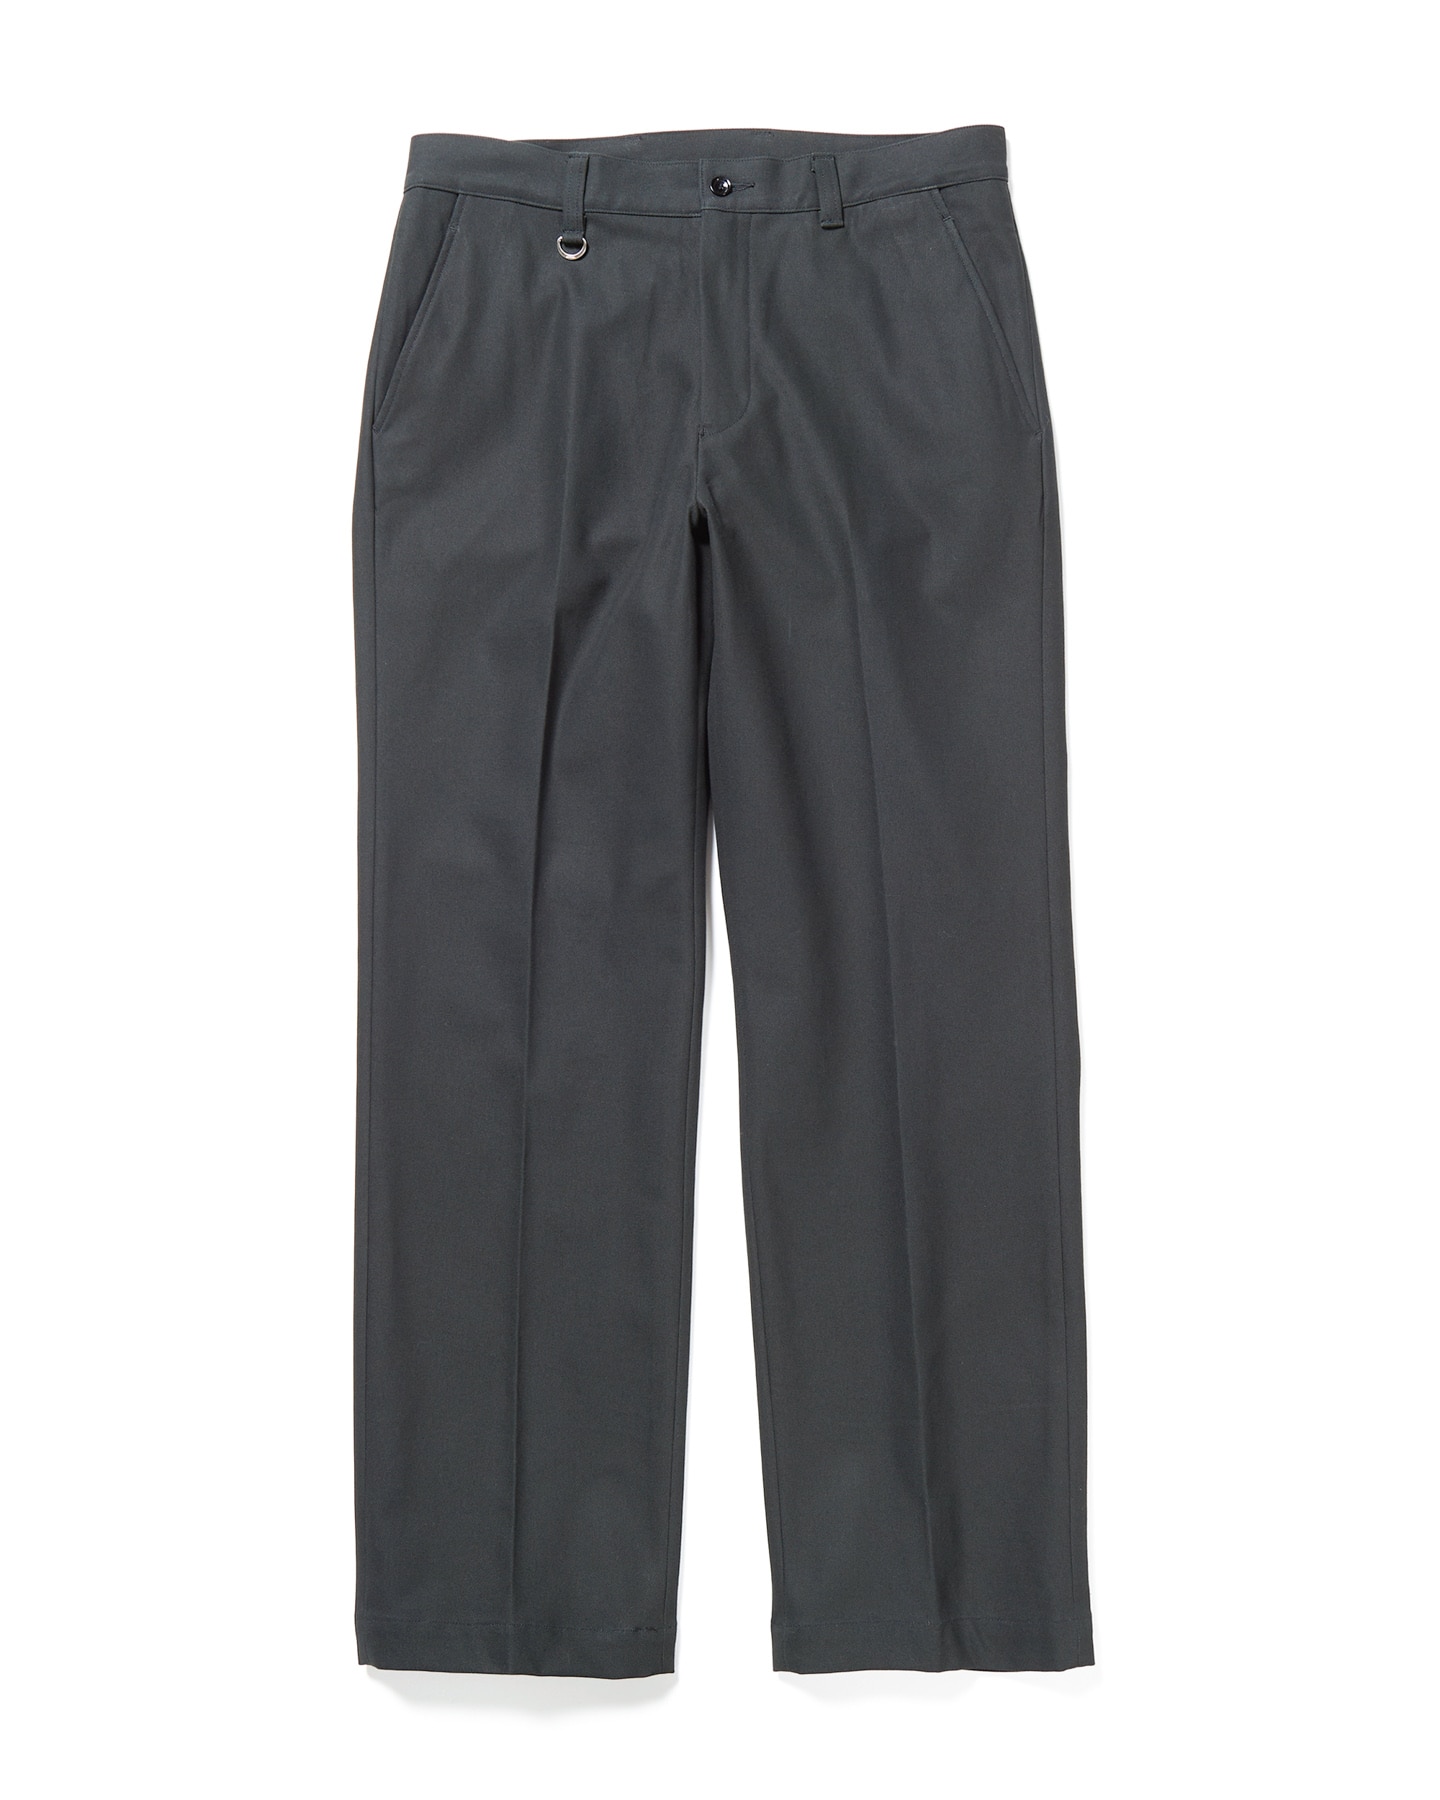 SOPH. | HIGH TWISTED WASHER COTTON SERGE STRAIGHT PANTS(M BLACK):